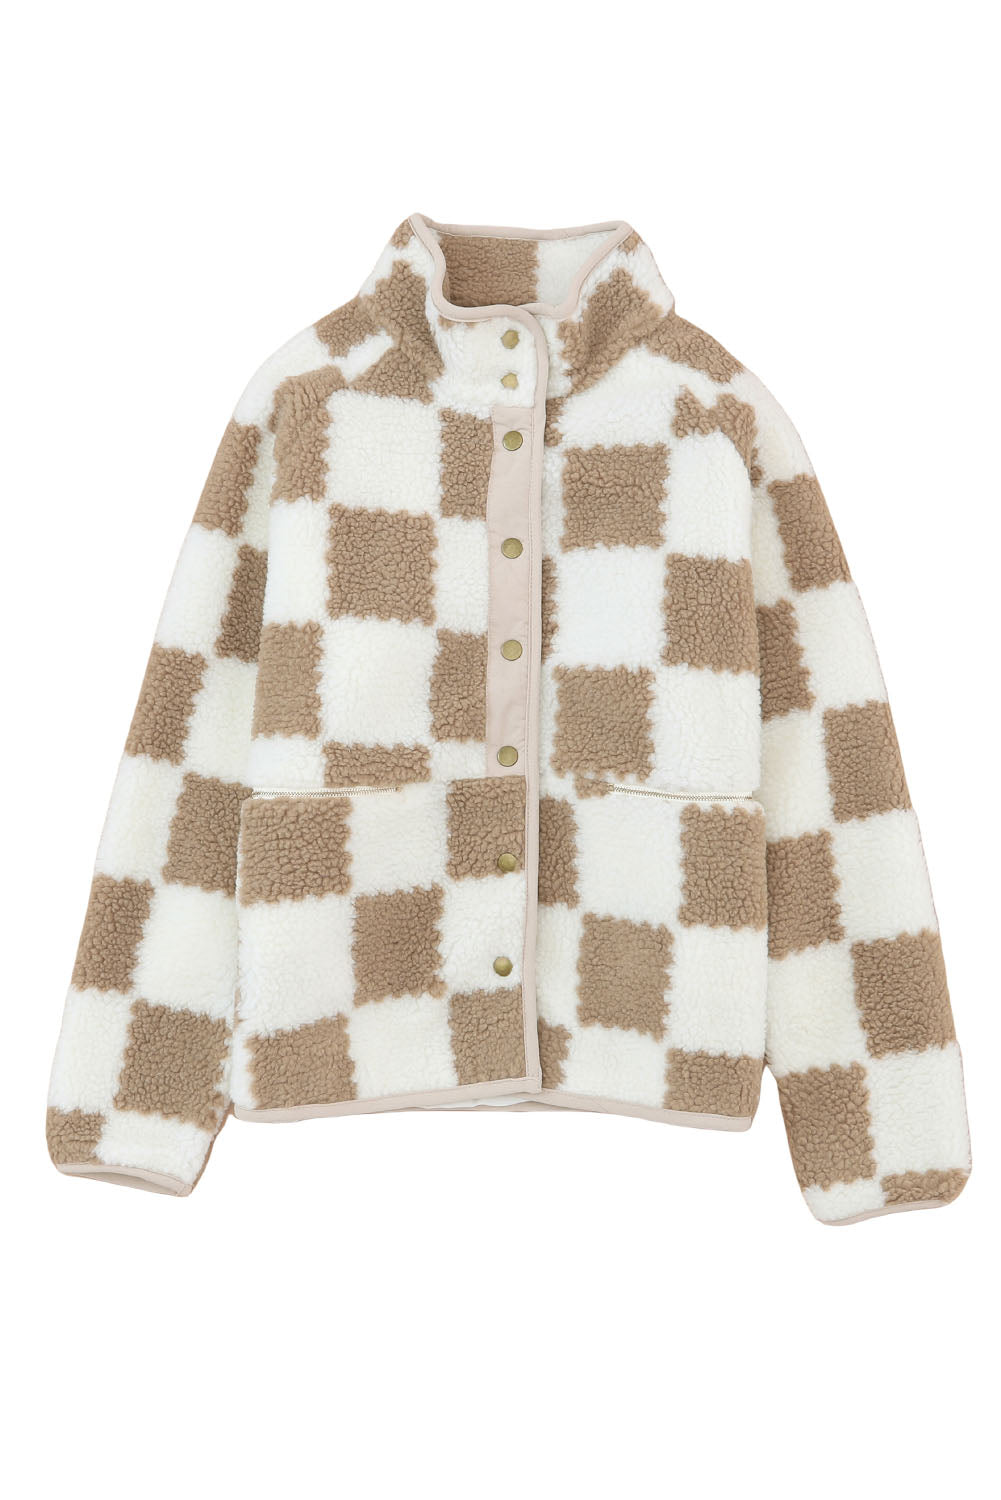 Brown Checked Snap Button Zip Pockets Sherpa Jacket